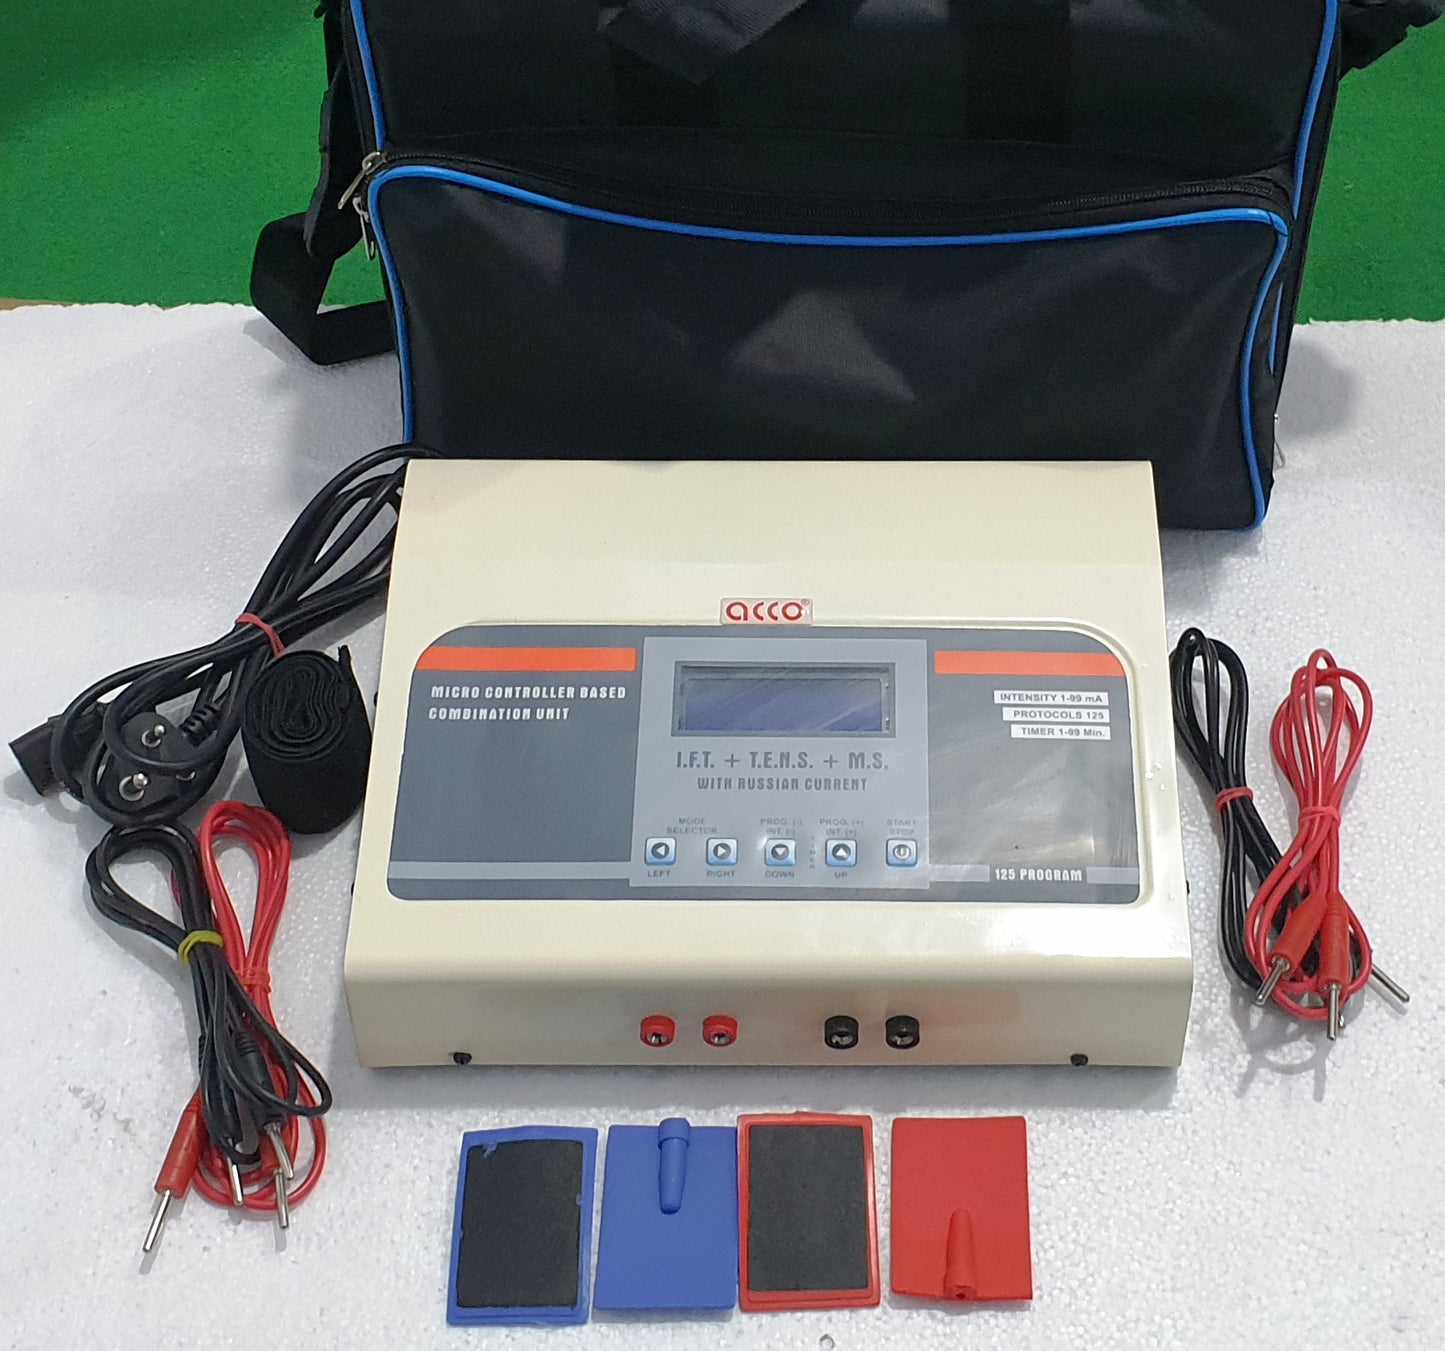  Interferential Therapy Unit